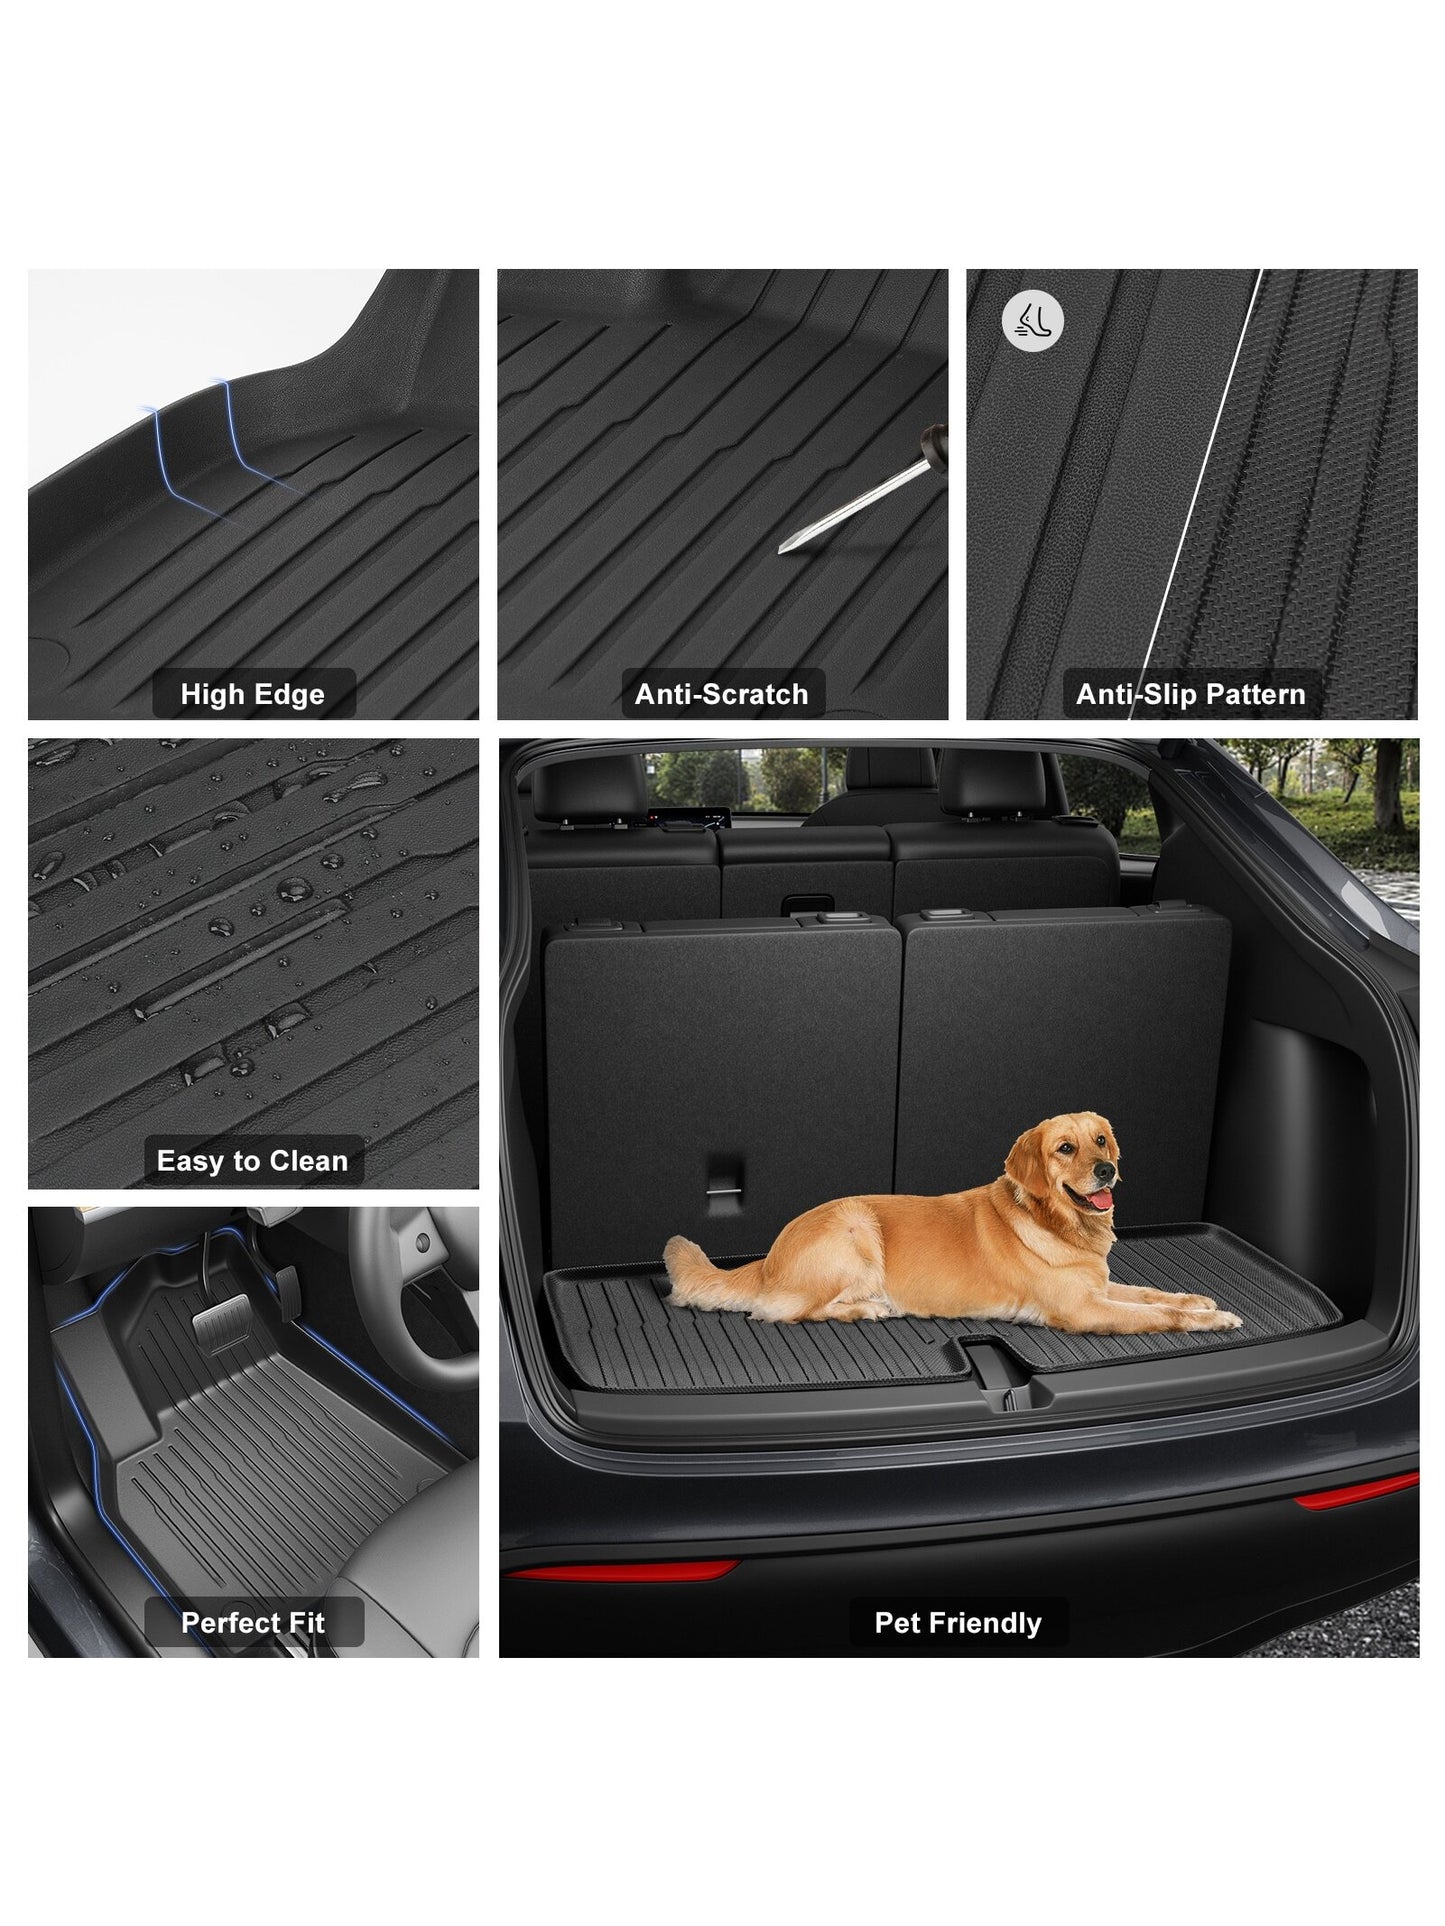 All-Weather Trunk Mats and Cargo Liners for Tesla Model Y 7 Seater (2020-2023) - Waterproof, Non-Slip Full Set Floor Liners (7PCS)